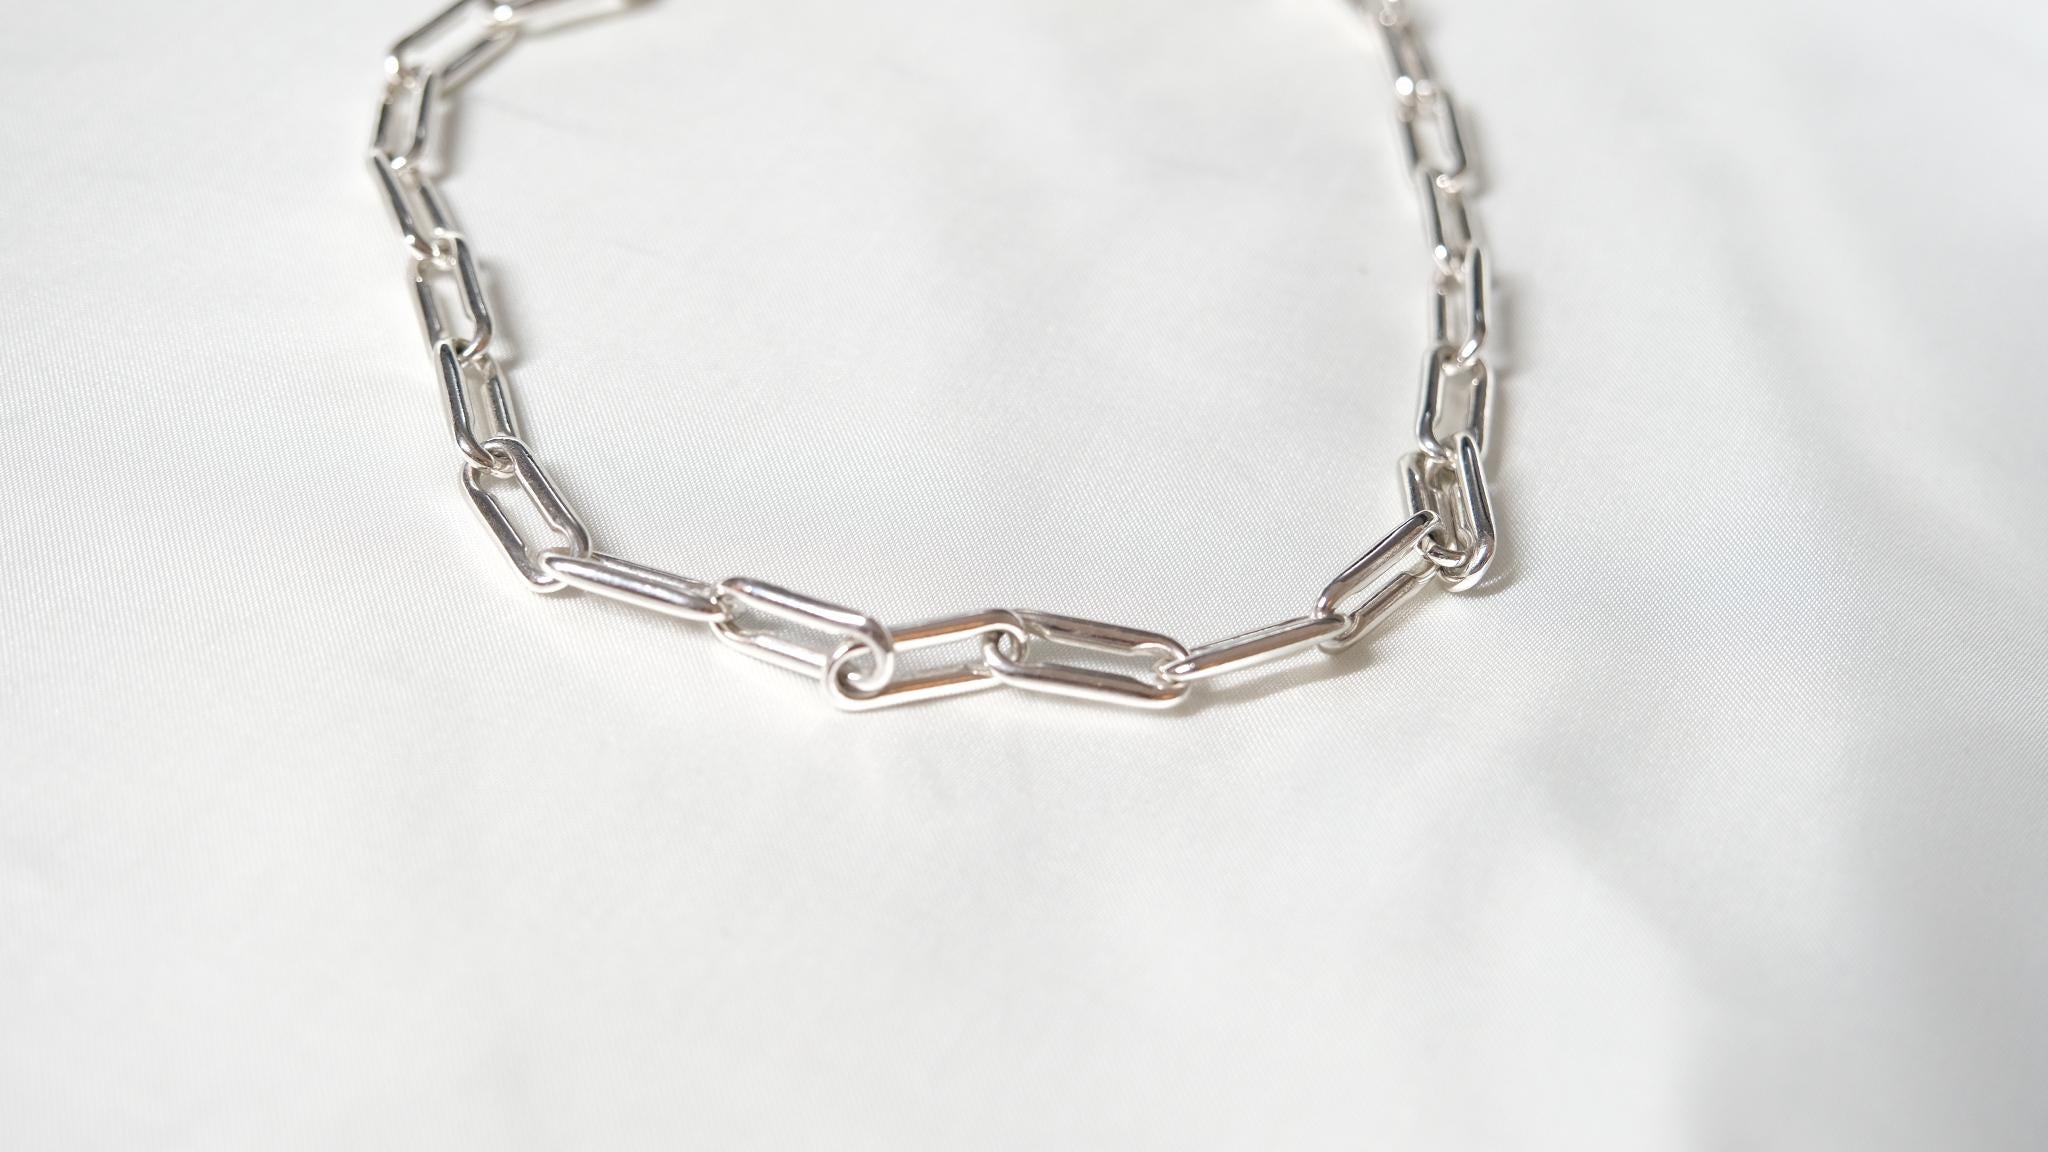 Product Details:

Linear link curved Necklace is symmetrically aligned with a bold modern look with internal curvature. Can be worn on its own or layered with other necklaces to create the ultimate stack. Officially Hallmarked at the Assay Office,